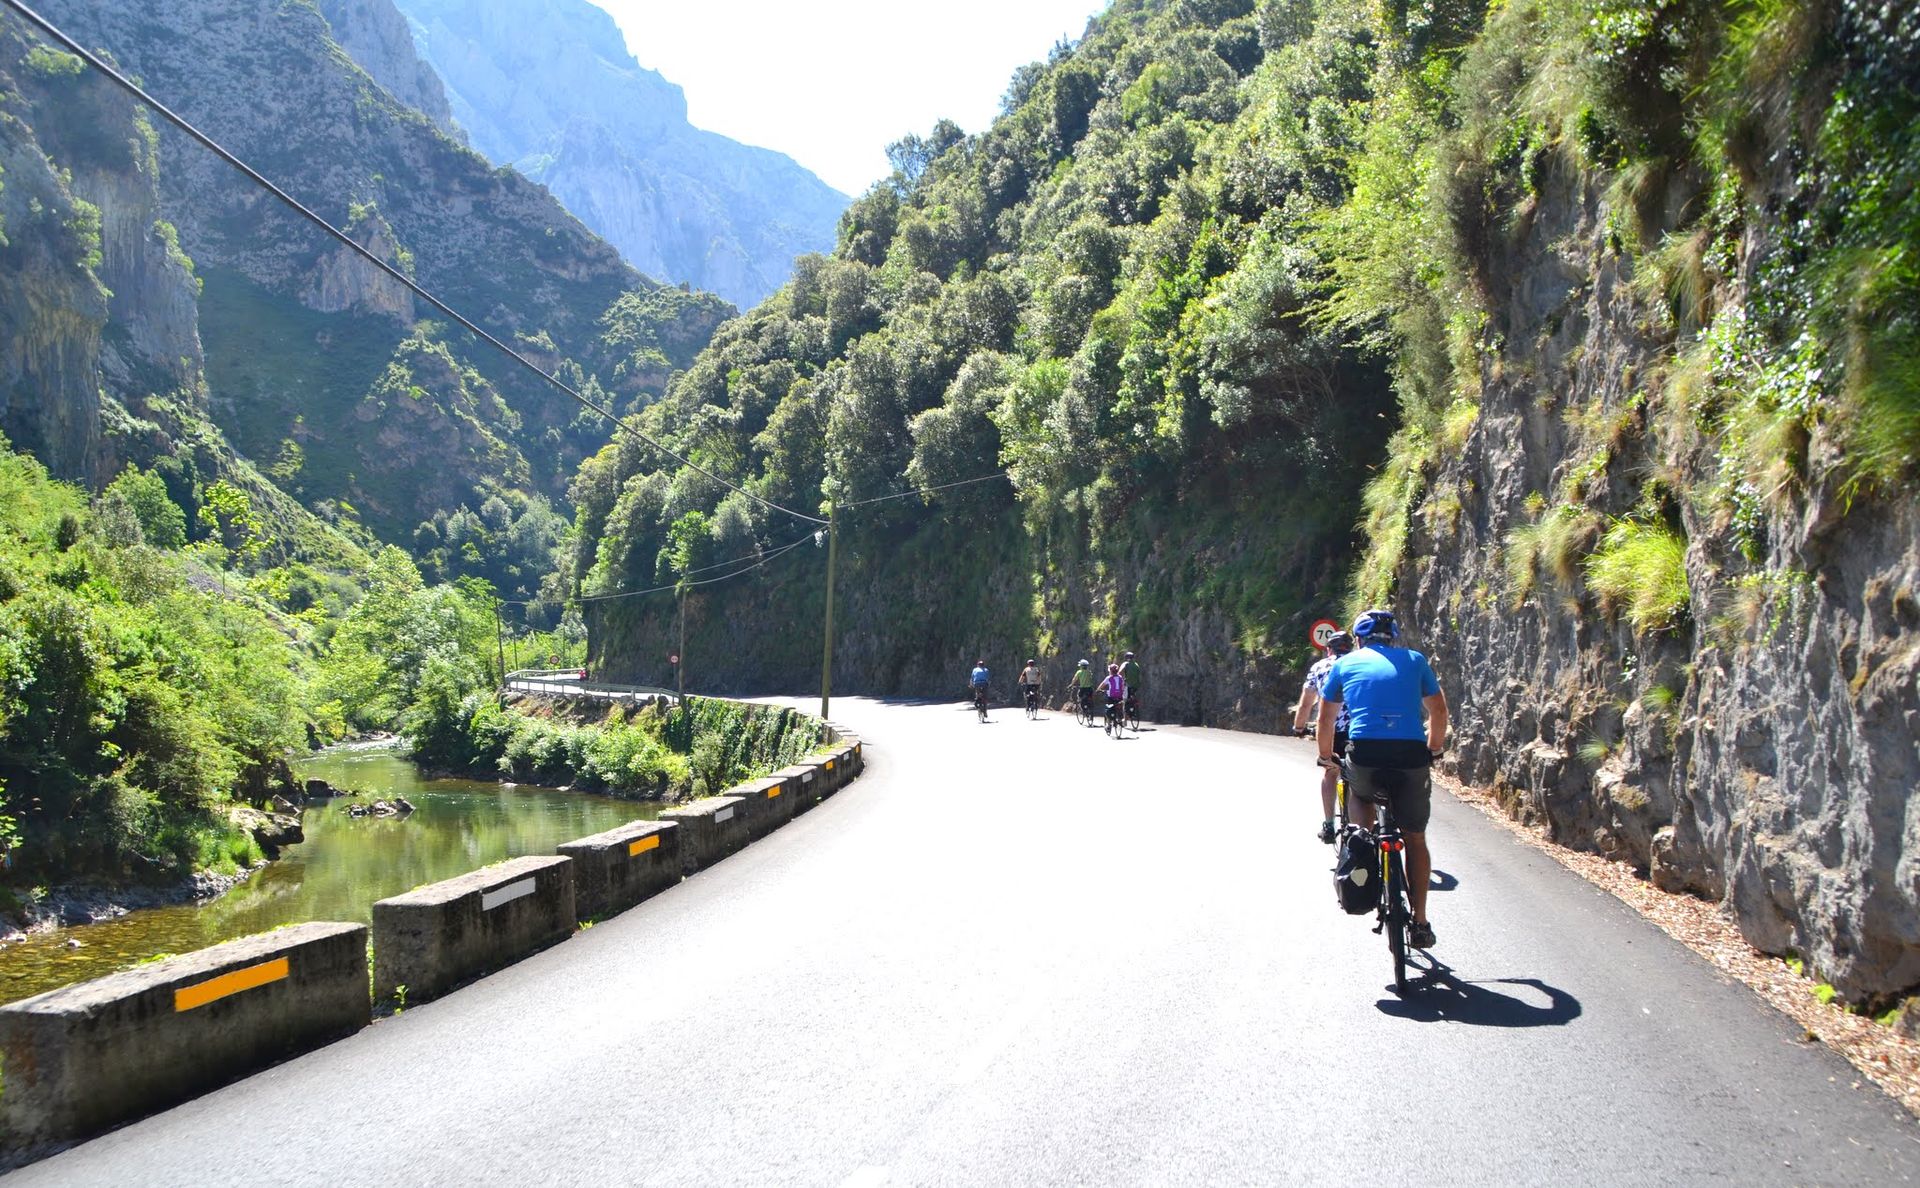 Cyclists riding on a tamac road in the Beyos Gorge, Asturias, Spain